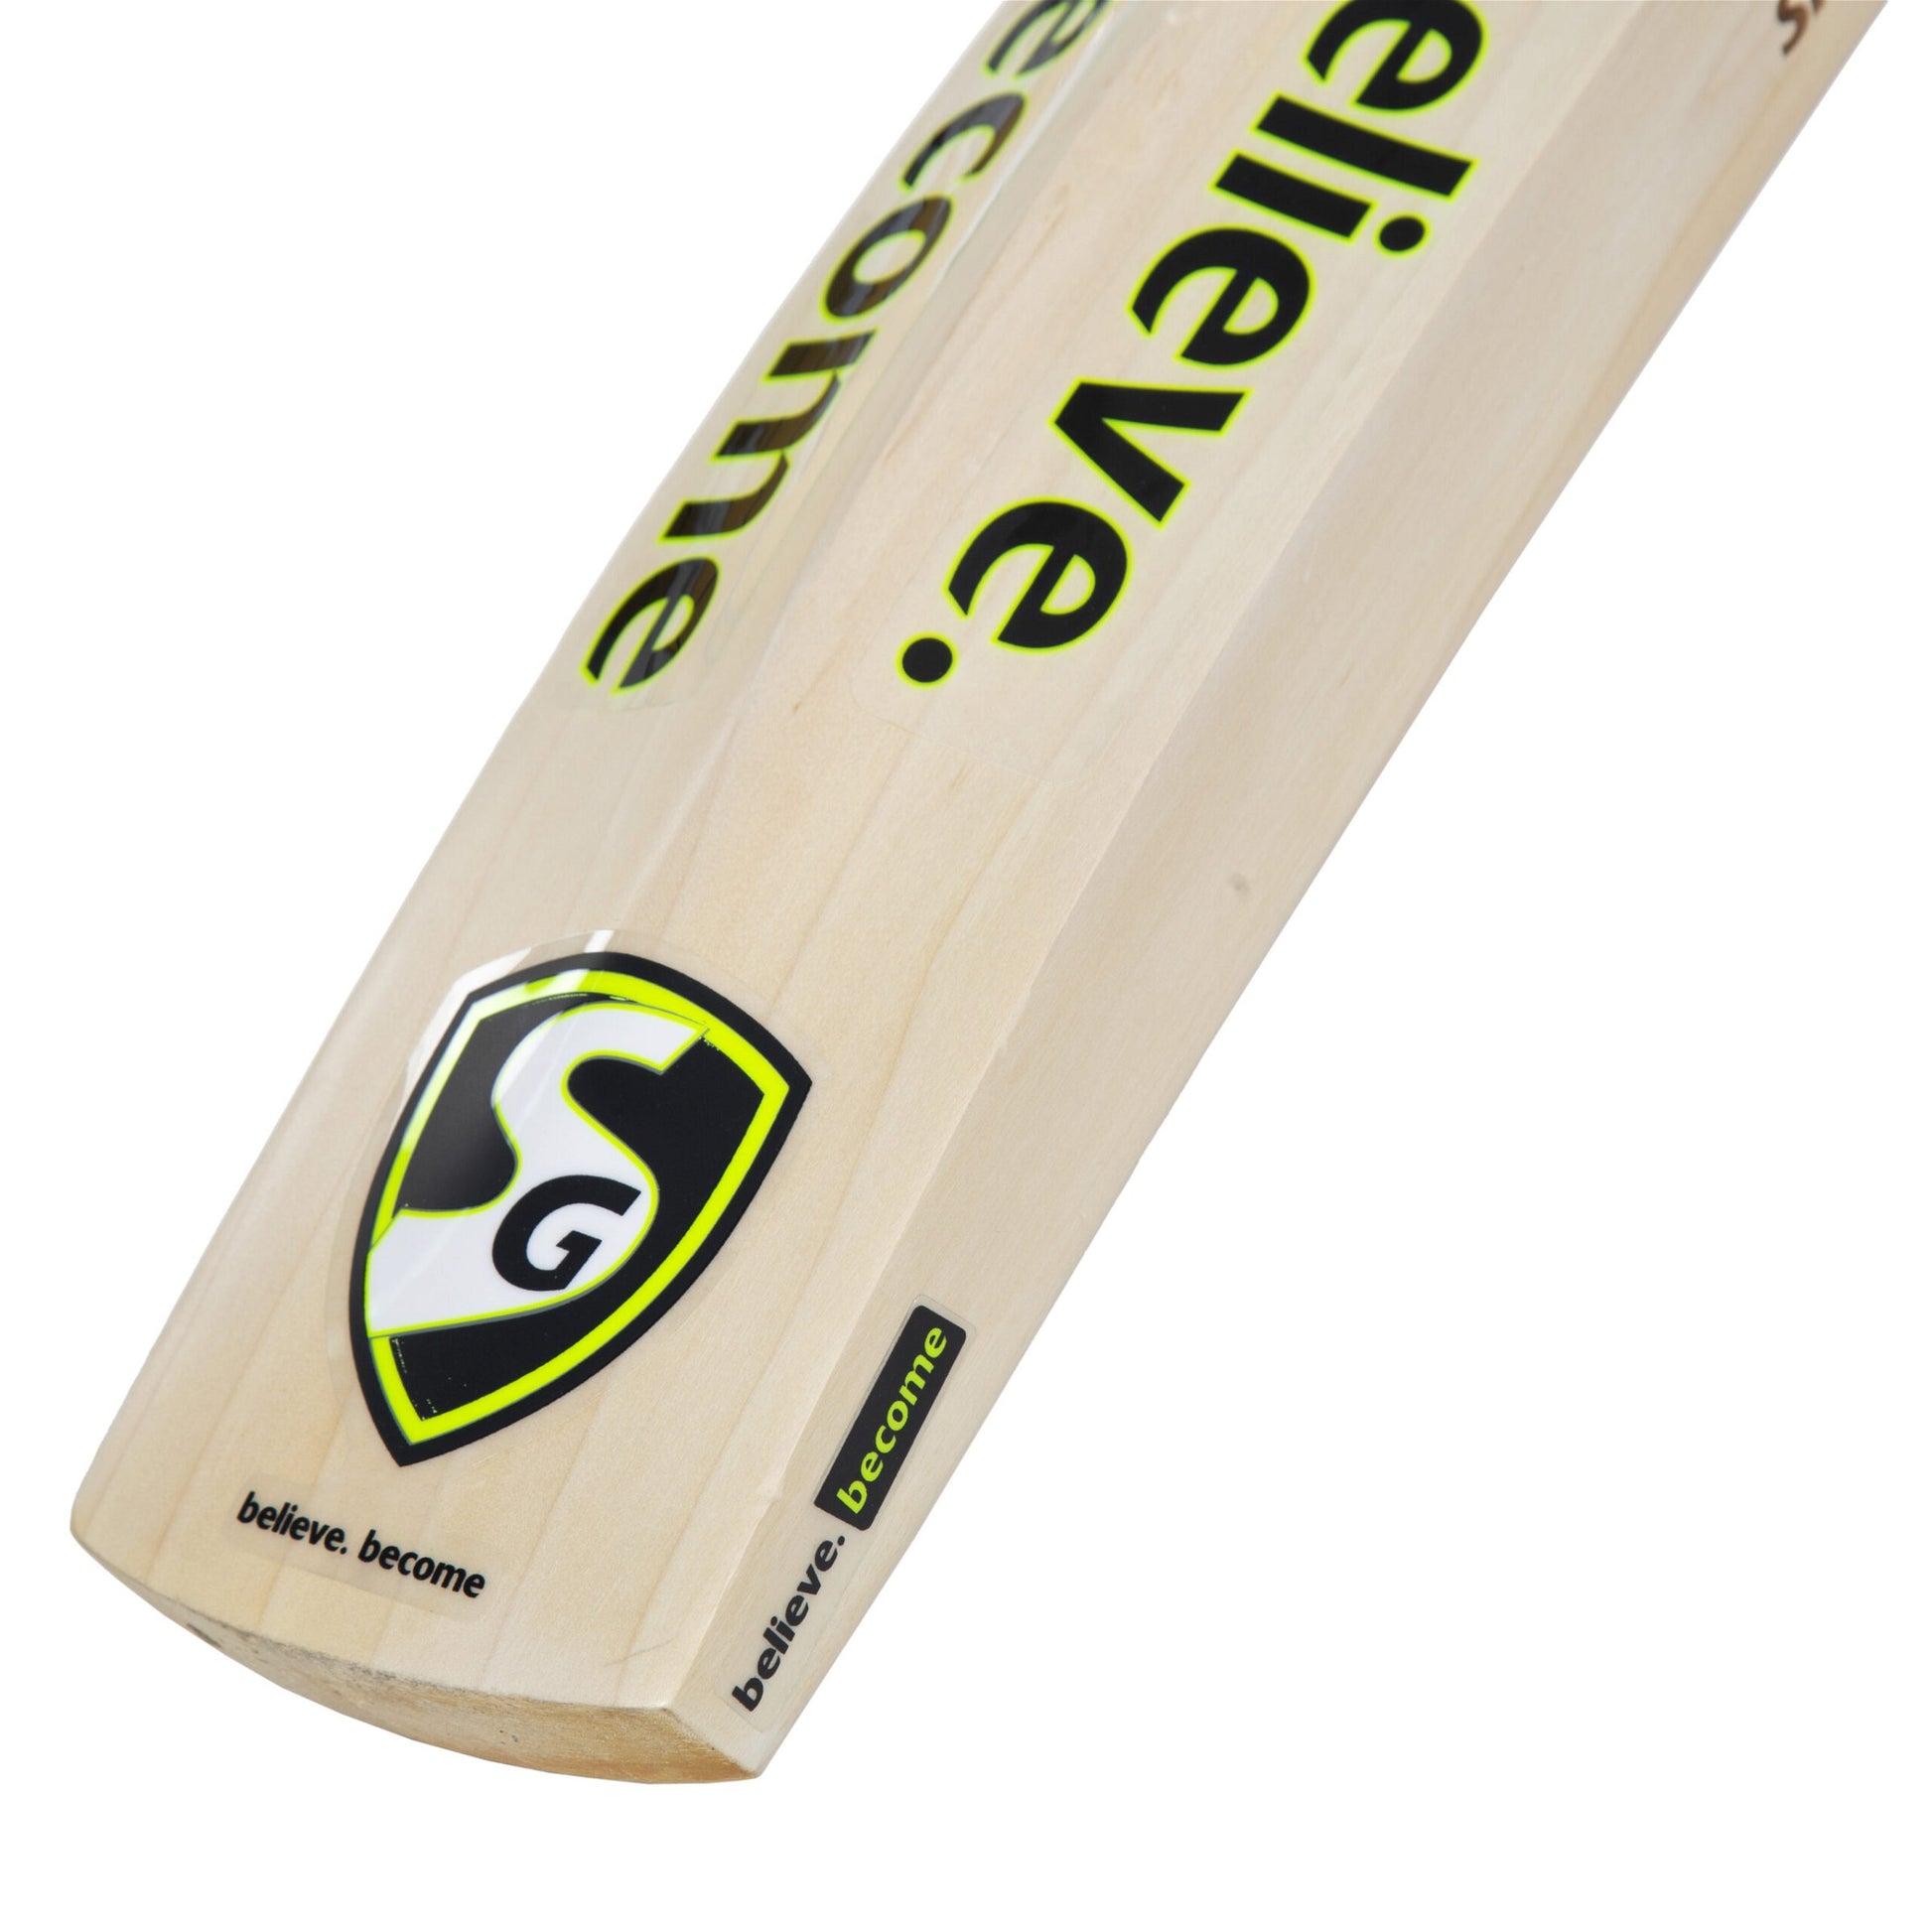 SG Sierra 250 Grade 4 world’s finest English willow traditionally shaped Cricket Bat (Leather Ball)